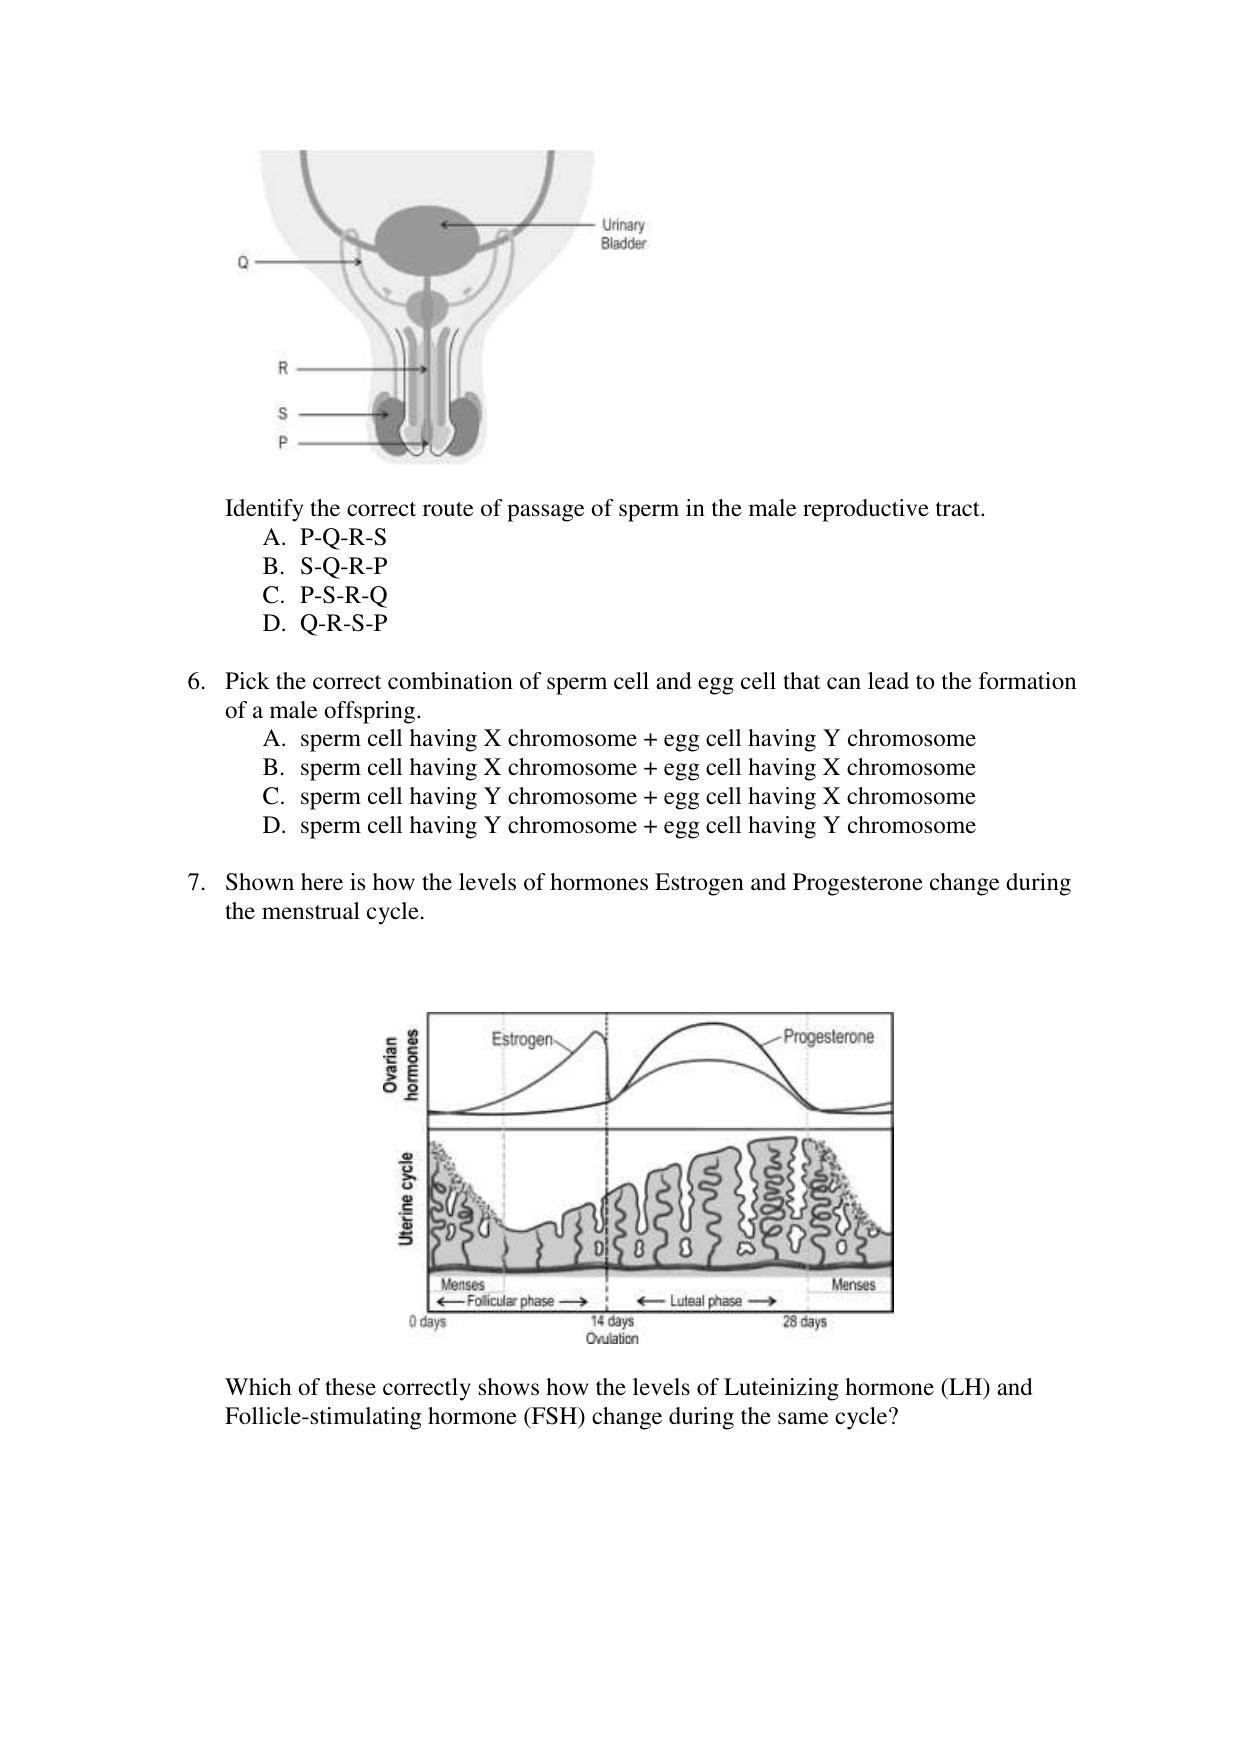 CBSE Class 12 Biology Term 1 Practice Questions 2021-22 - Page 2